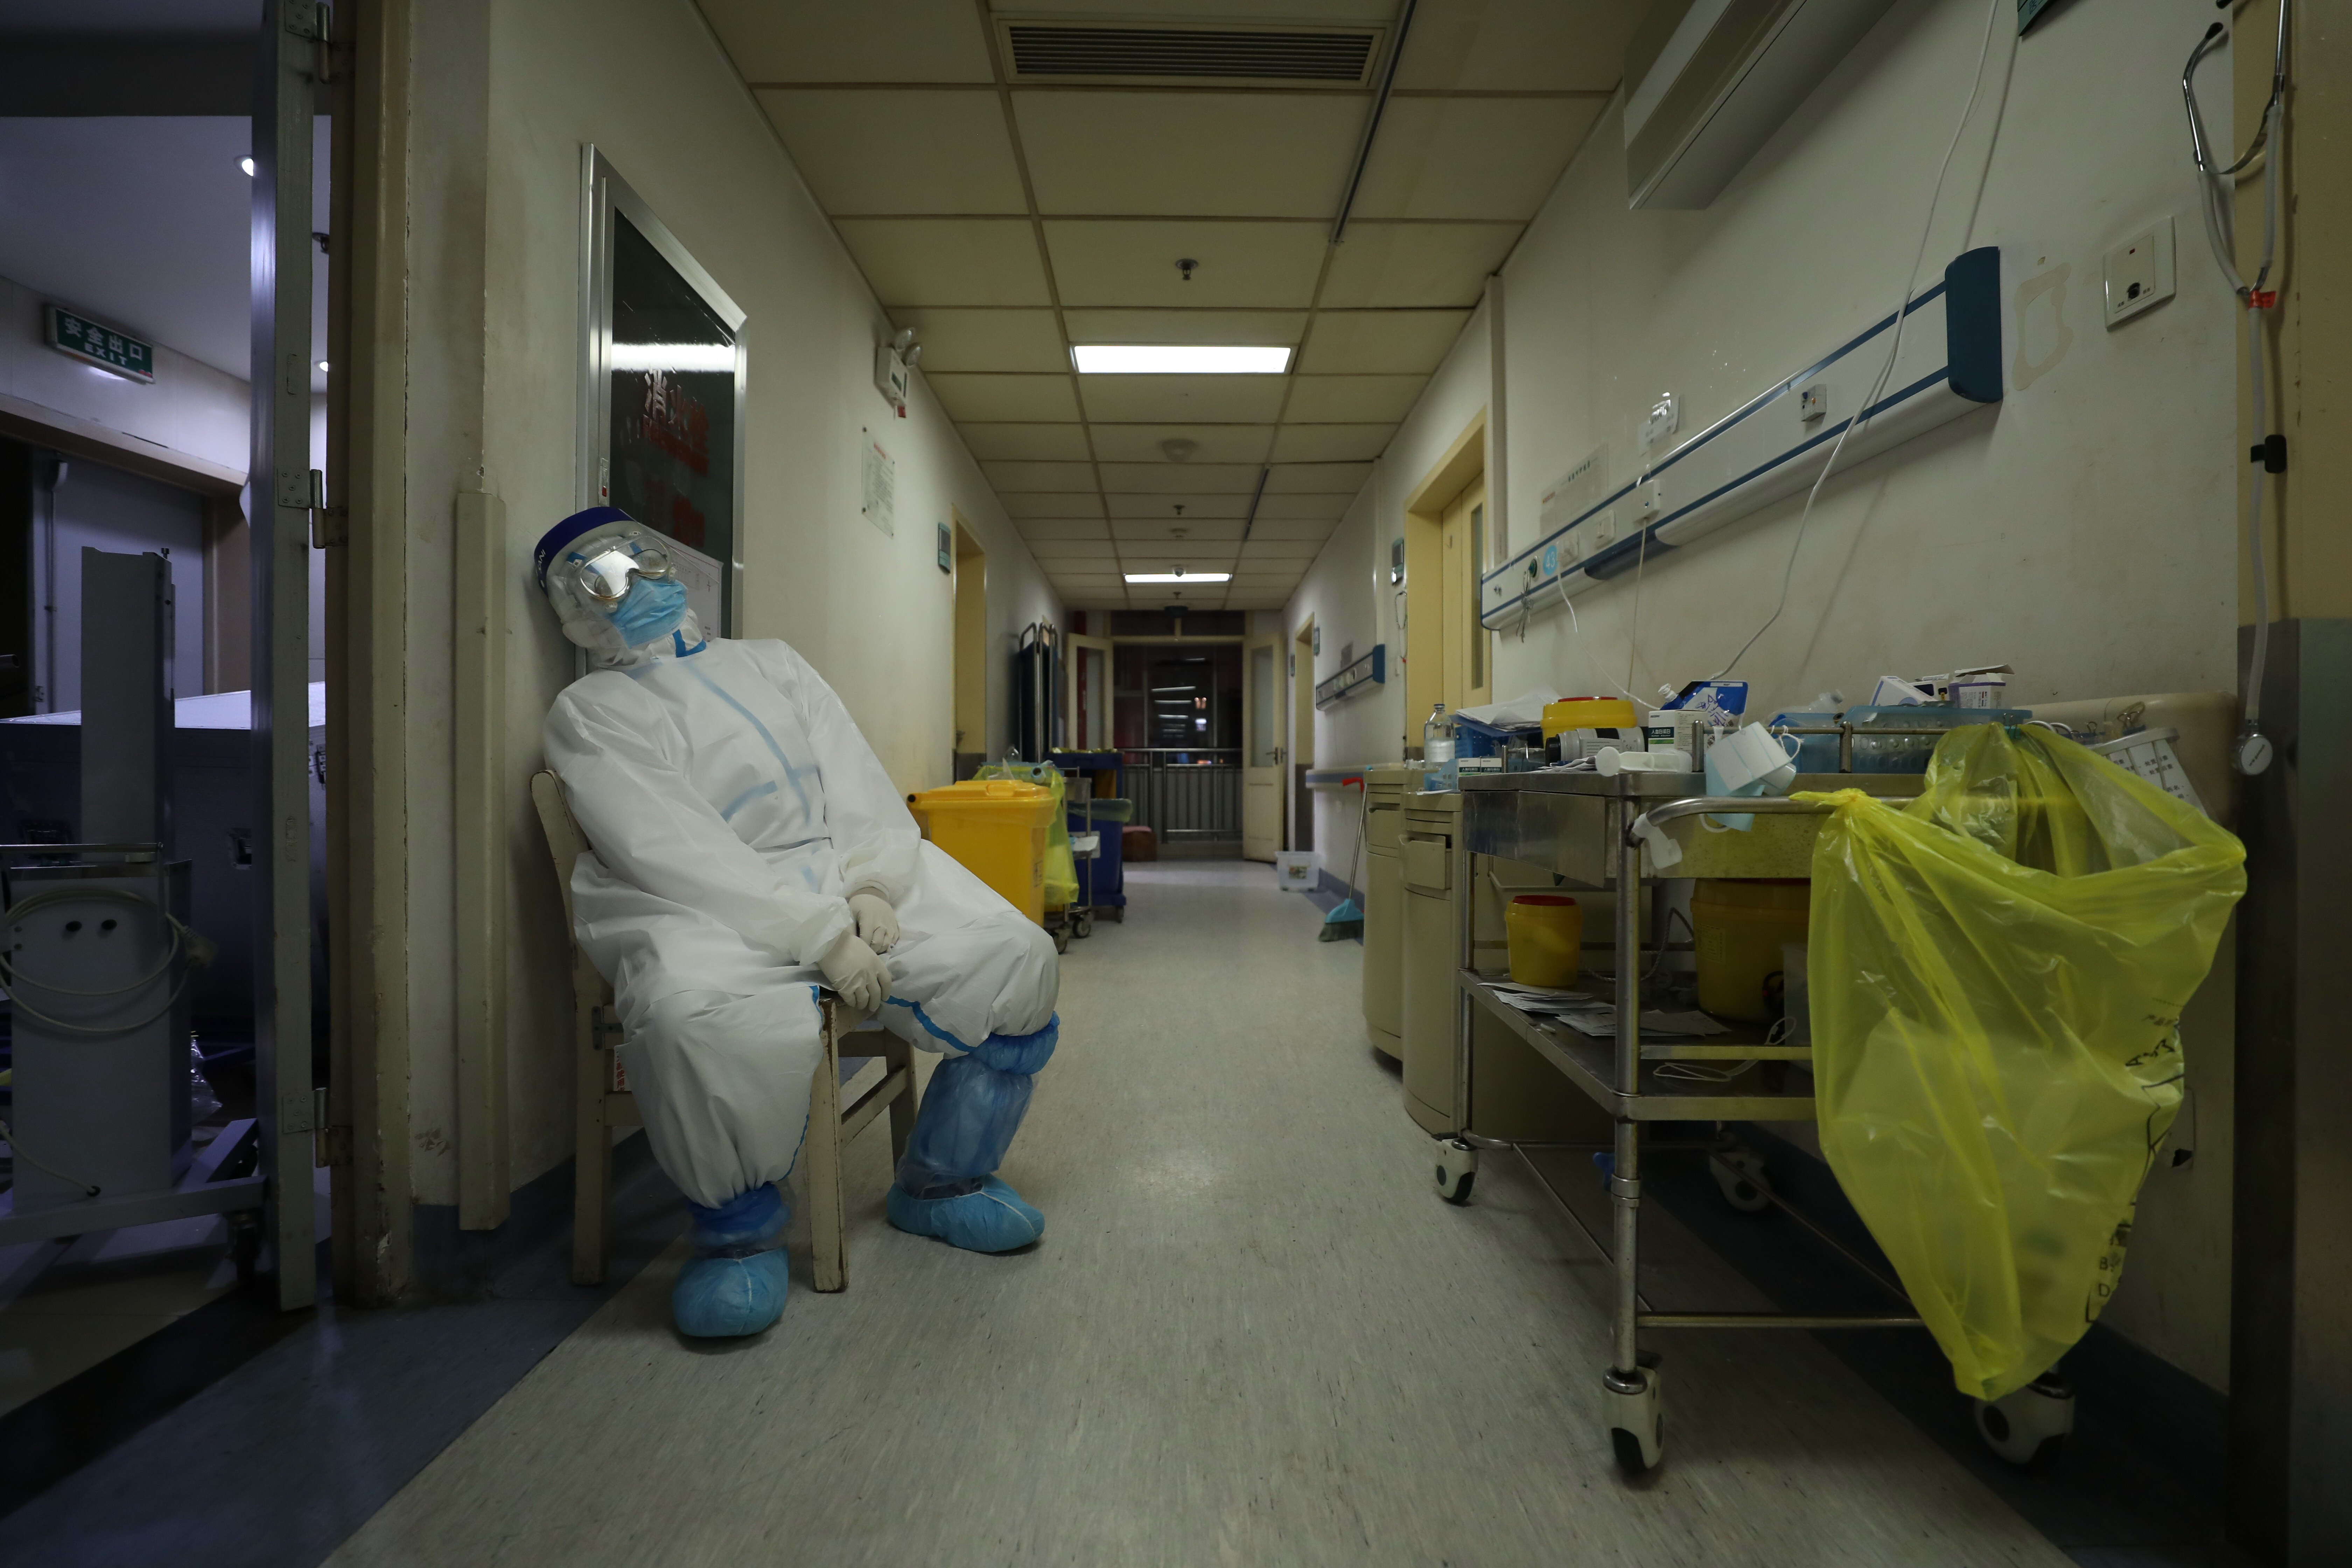 A member of staff takes a break in a hospital designated for Covid-19 patients in Wuhan. Photo: Barcroft Media via Getty Images